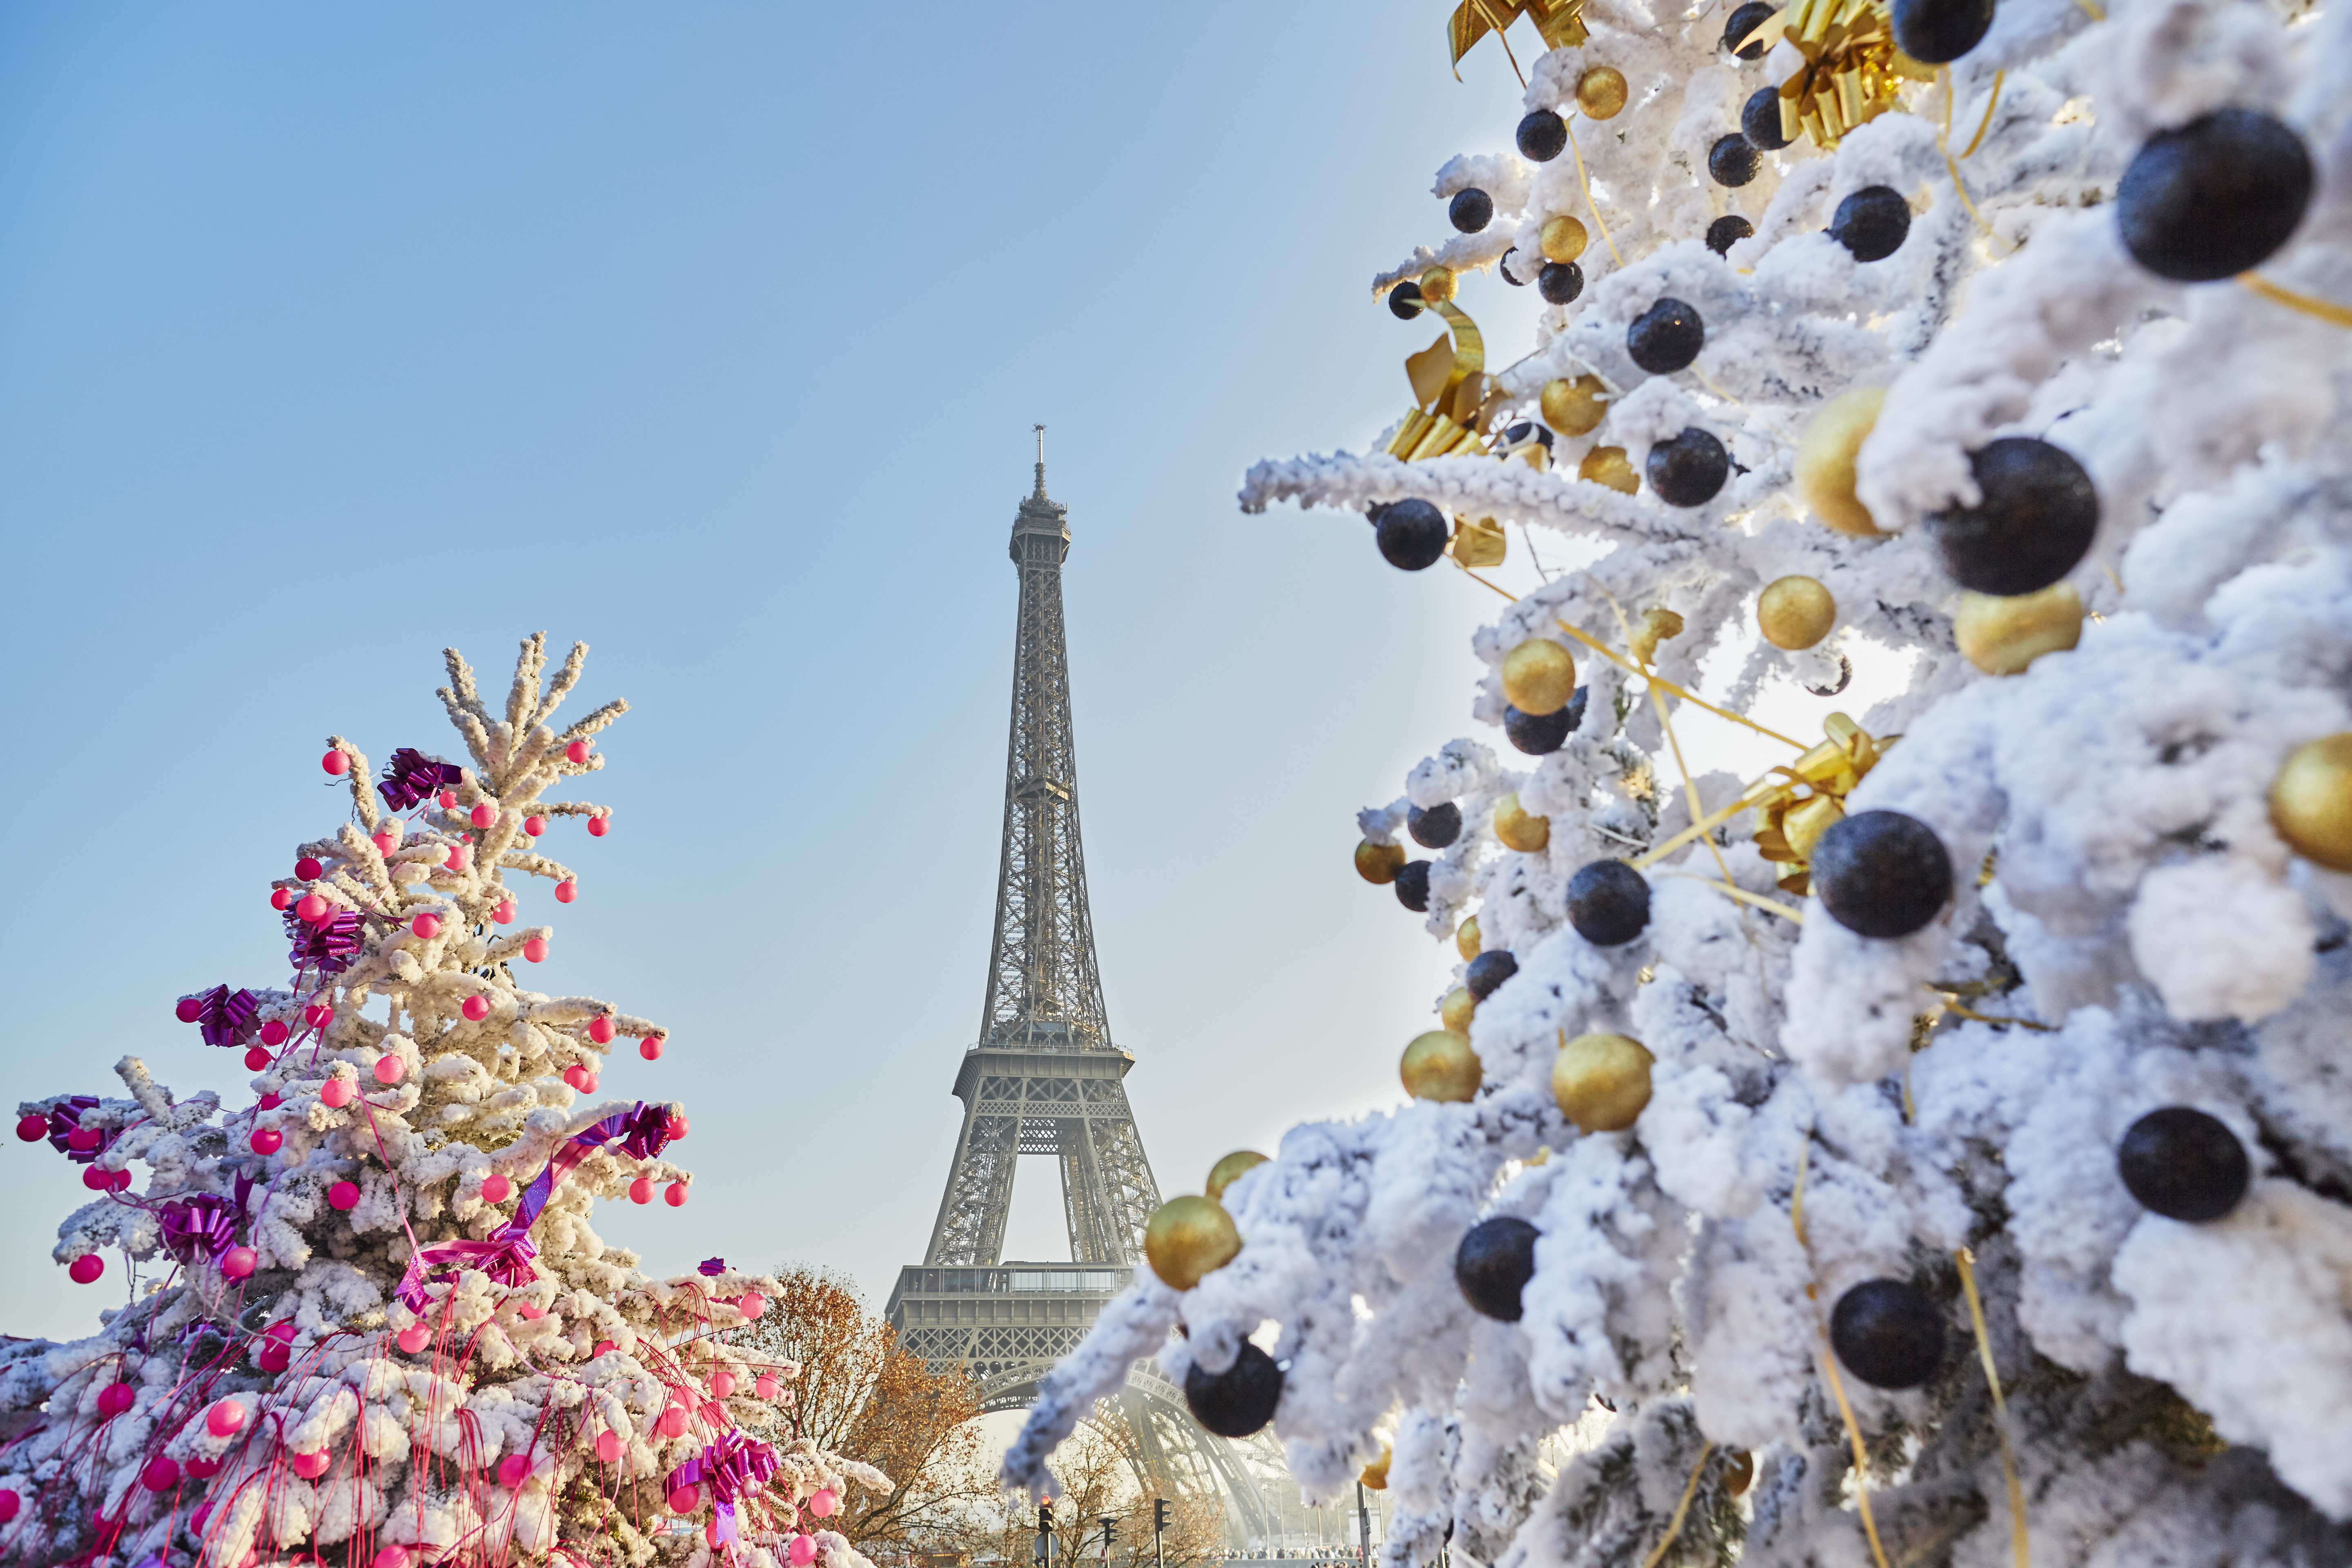 Eiffel Tower at Christmas time surrounded by decorated trees